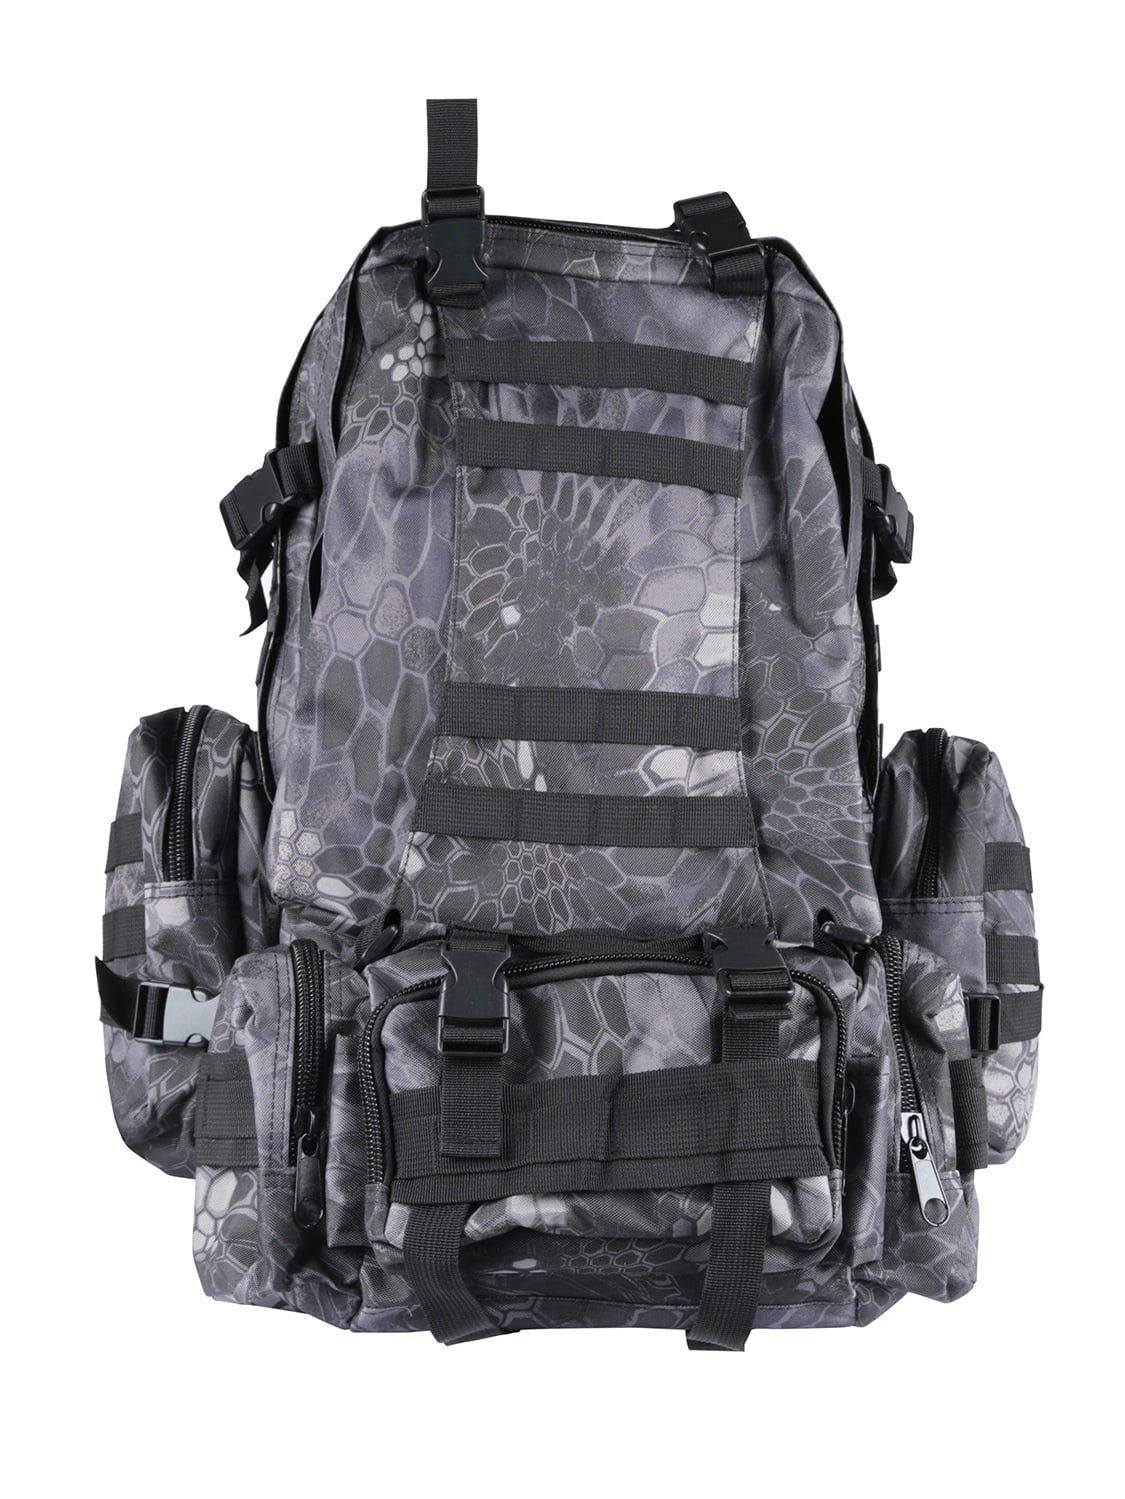 55L Military Black Pythons Grain Molle Camping Backpack Tactical Hike Travel Bag